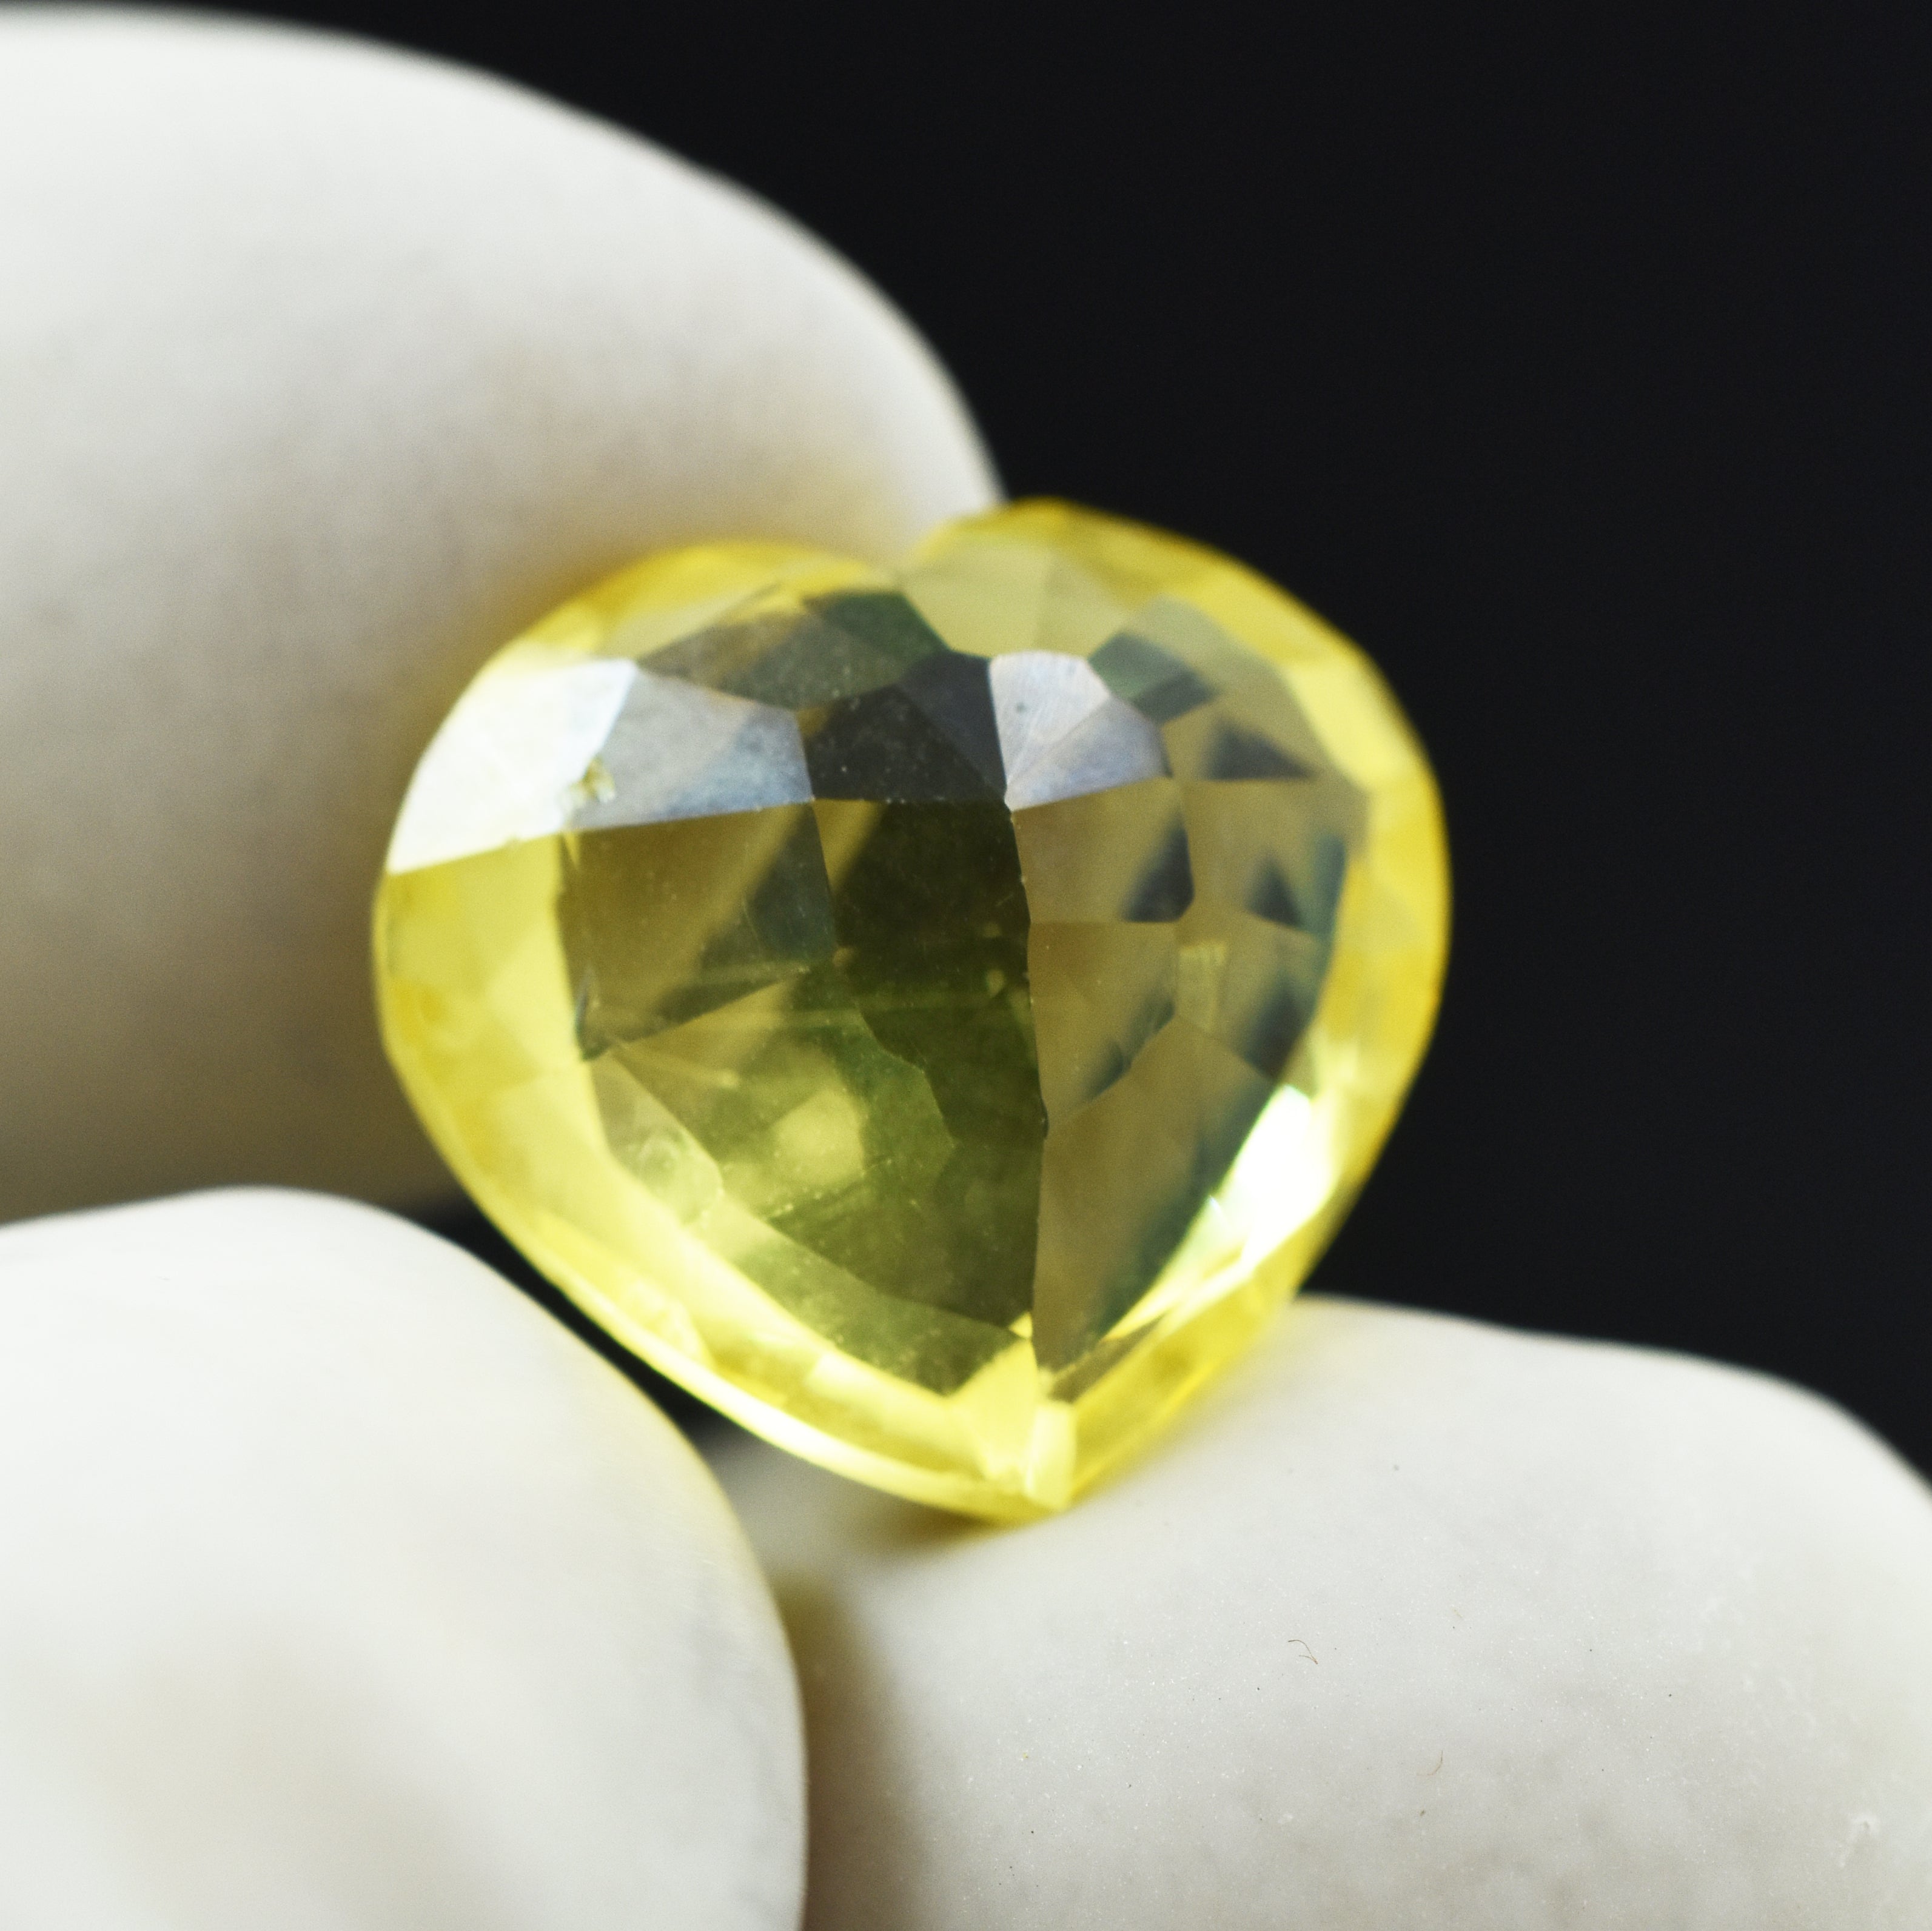 Natural Certified 10.10 Ct Ceylon Yellow Sapphire Heart Shape Loose Gemstone Best For making Jewelry, Yellow Sapphire Ring | Loose Yellow Sapphire |  Natural Yellow Stone Best Sale Going on